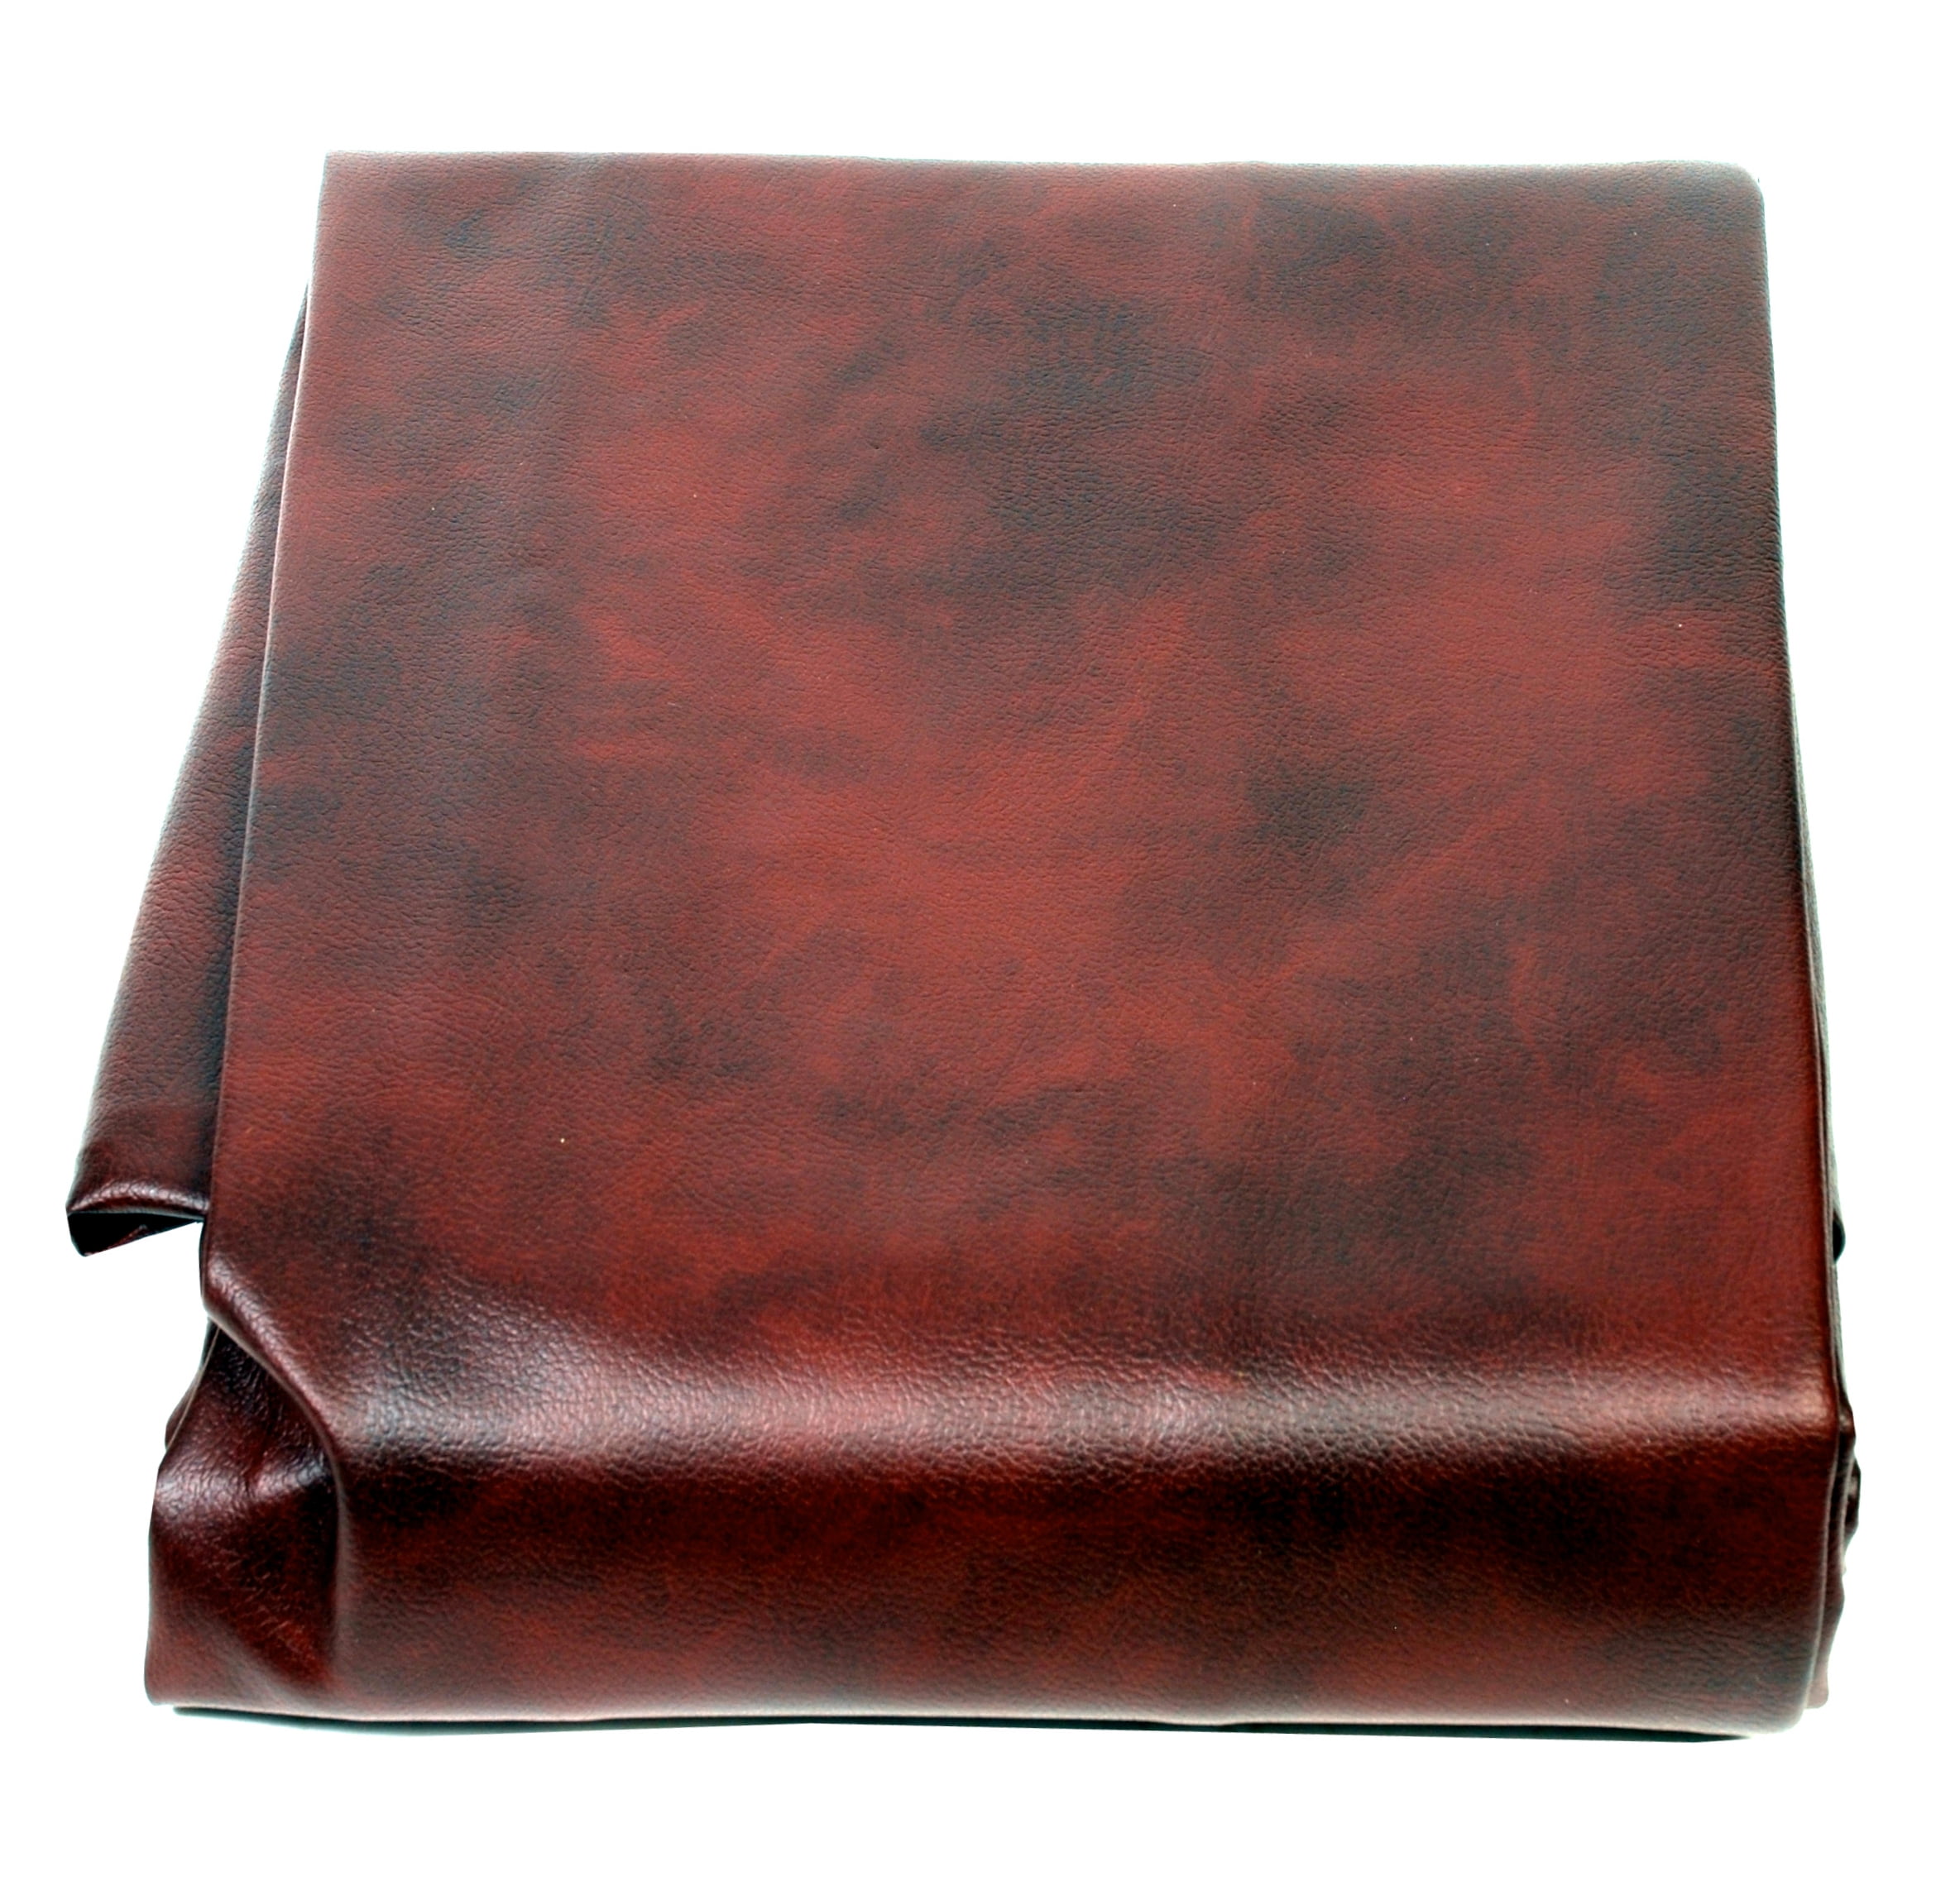 7 8 9ft Heavy Duty Leatherette Billiard, Leather Pool Table Cover